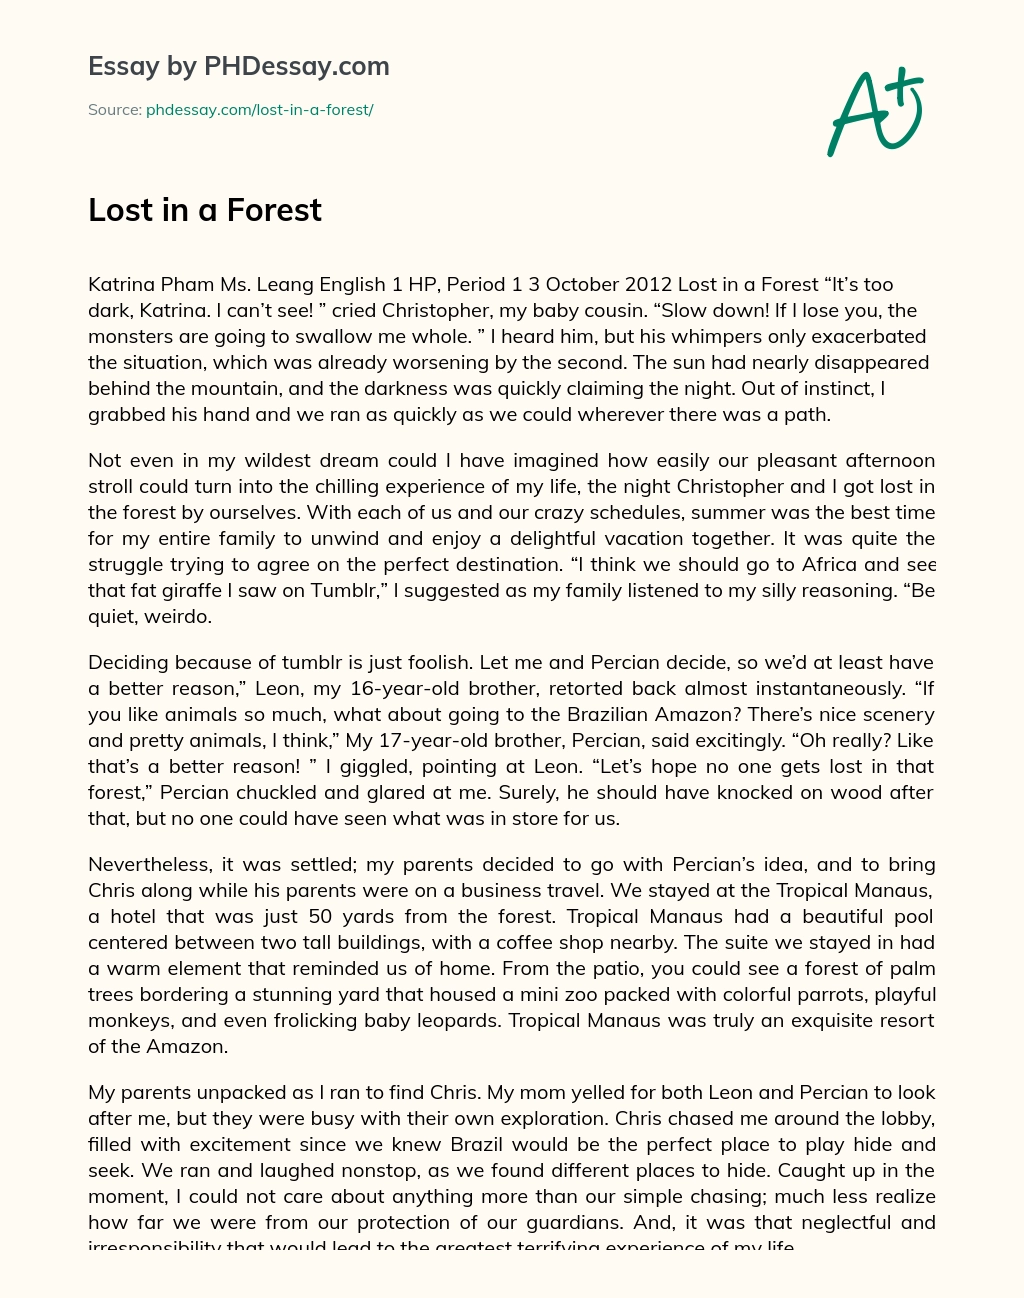 Lost in a Forest essay